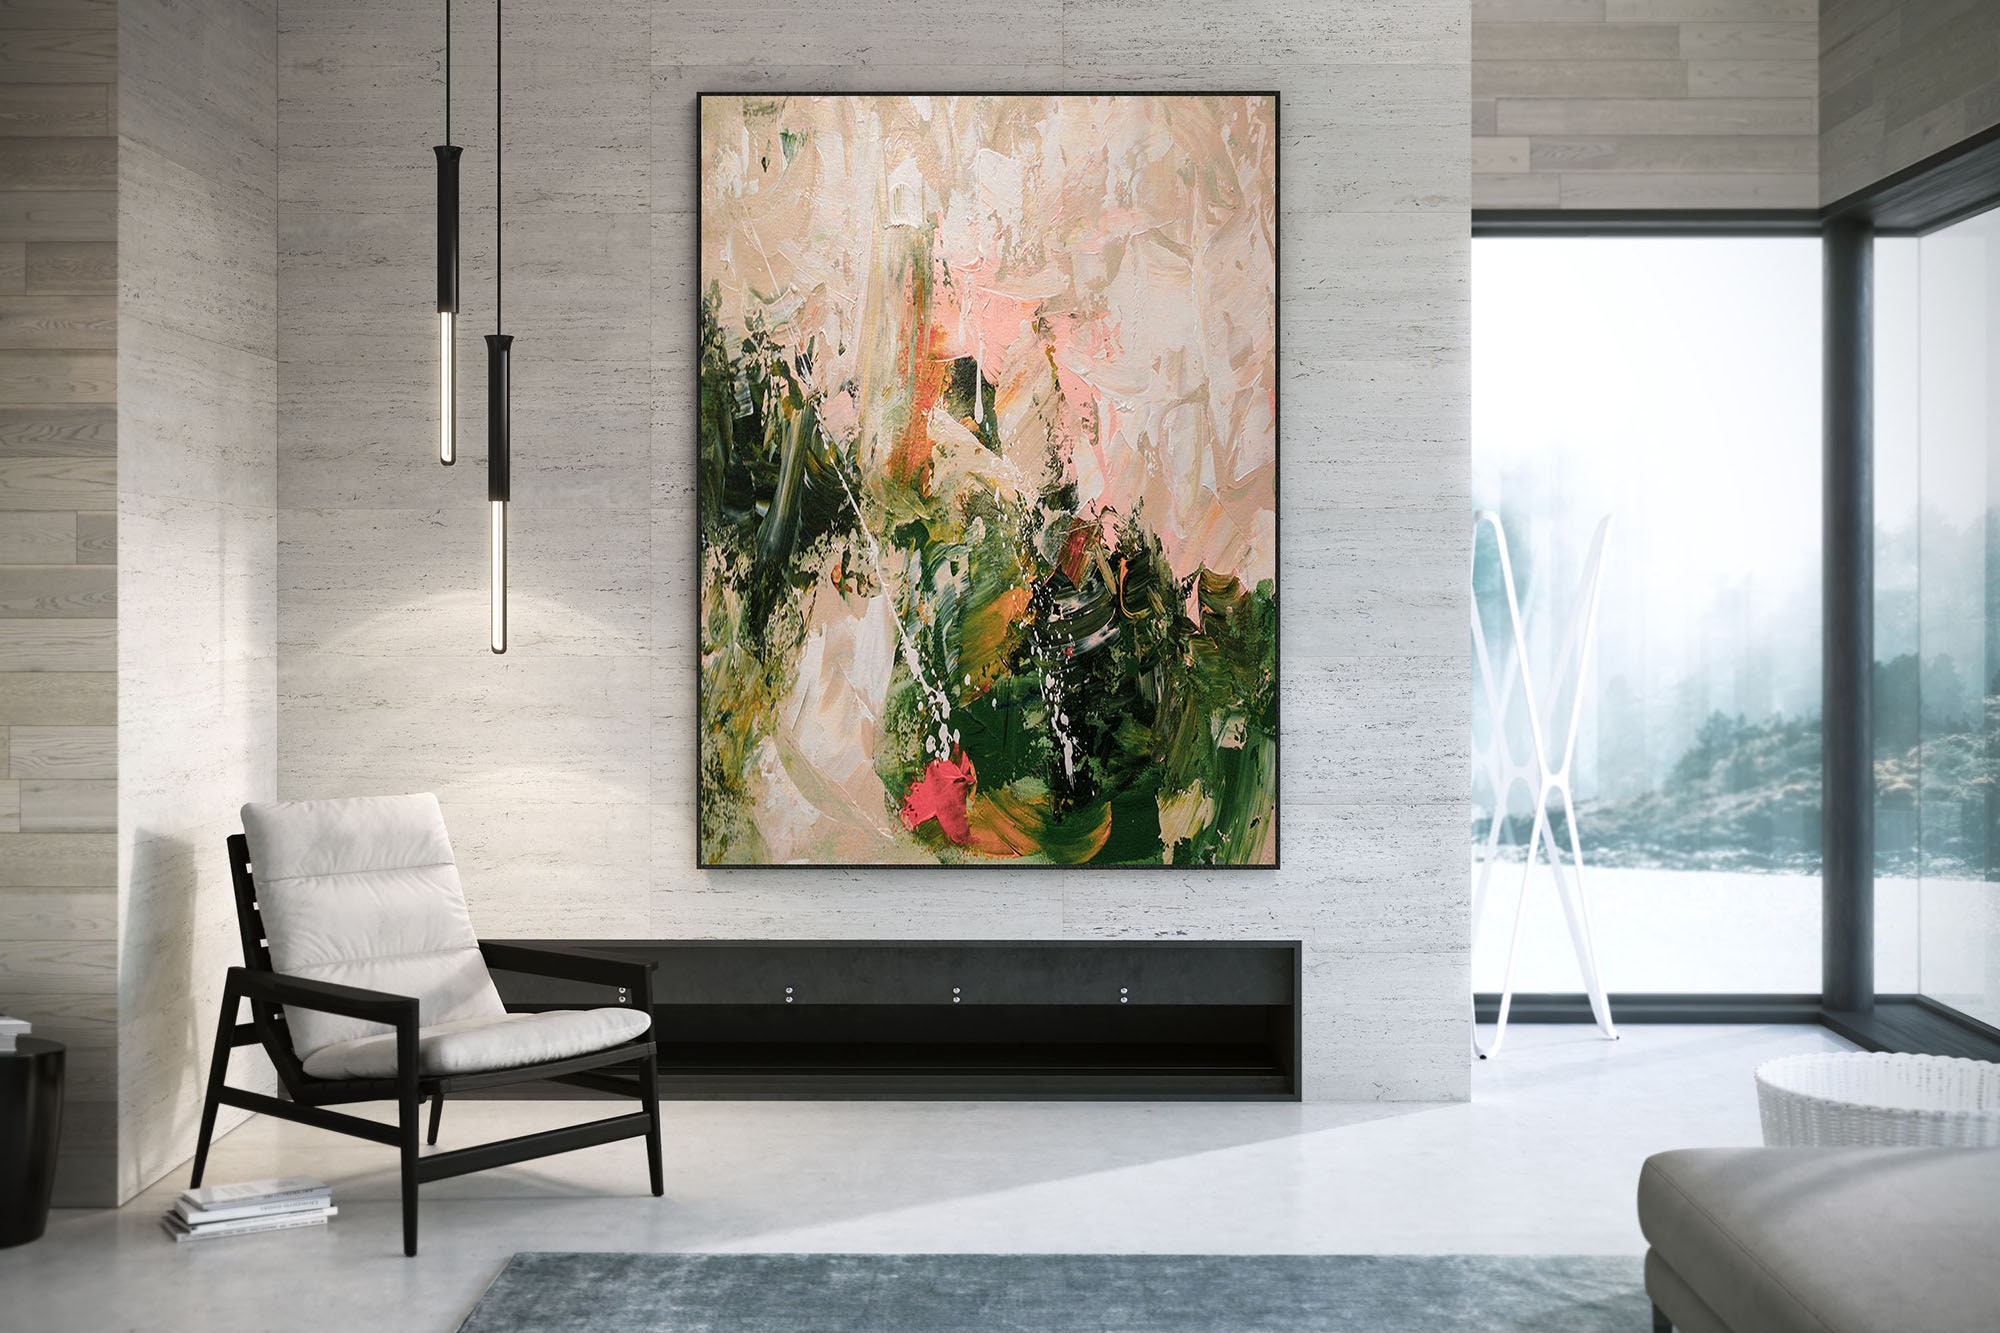 Large Painting On Canvas,Extra Large Painting On Canvas,Large Art On  Canvas,Large Interior Art,Square Painting Dac047,Buy Large Canvas For  Painting